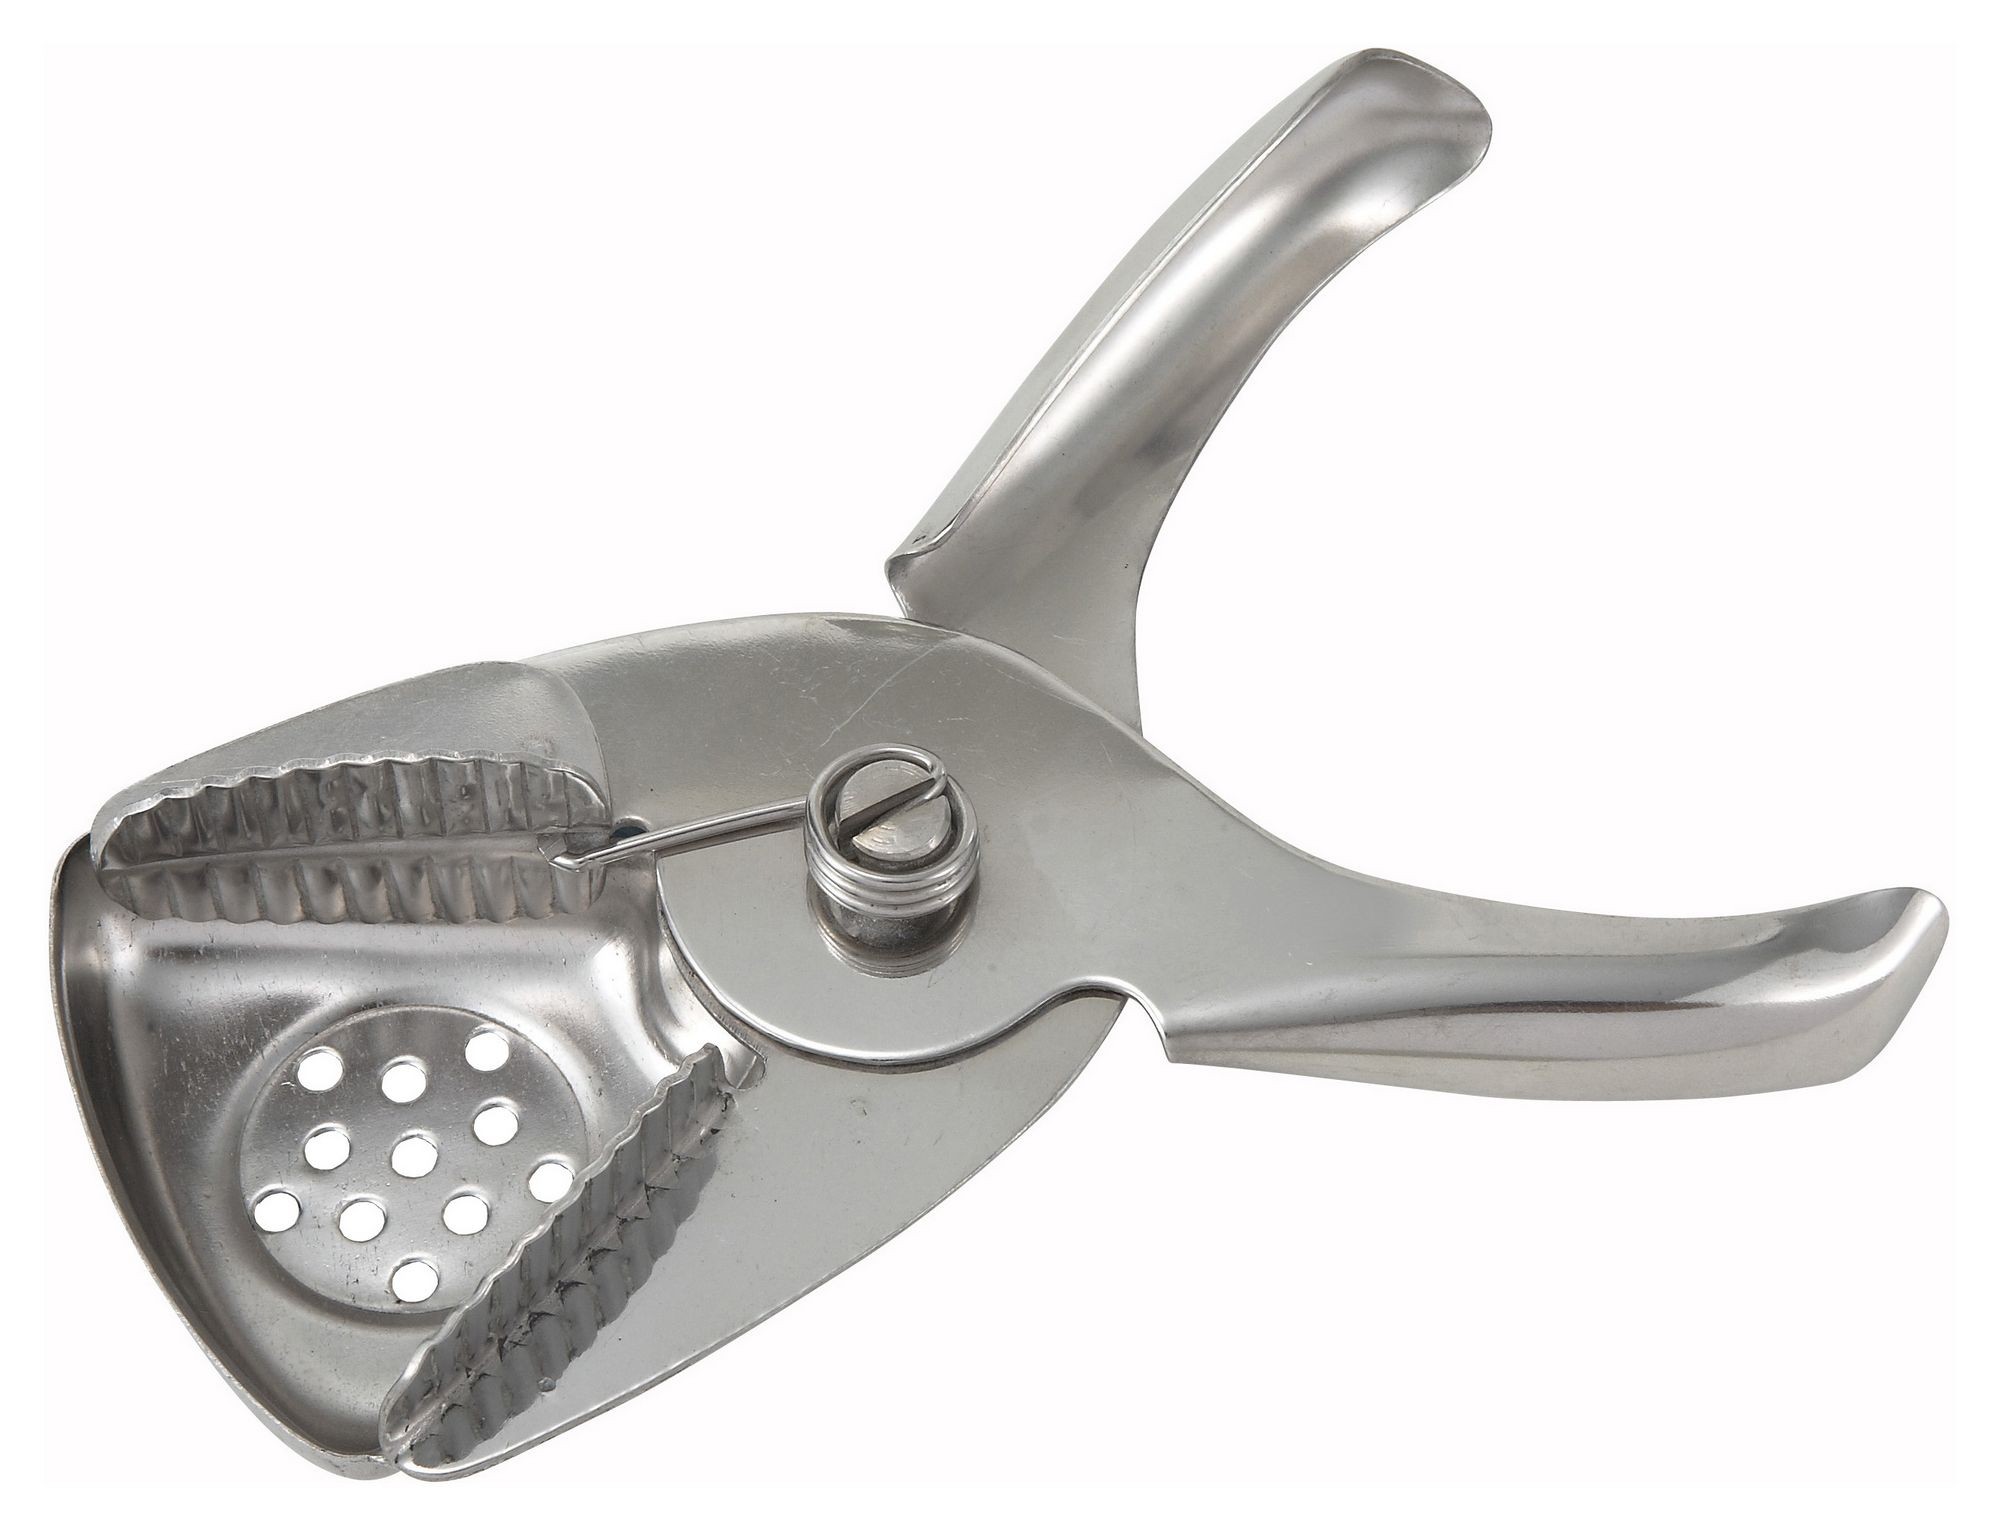 Winco LS-3 Stainless Steel Lemon/Lime Squeezer